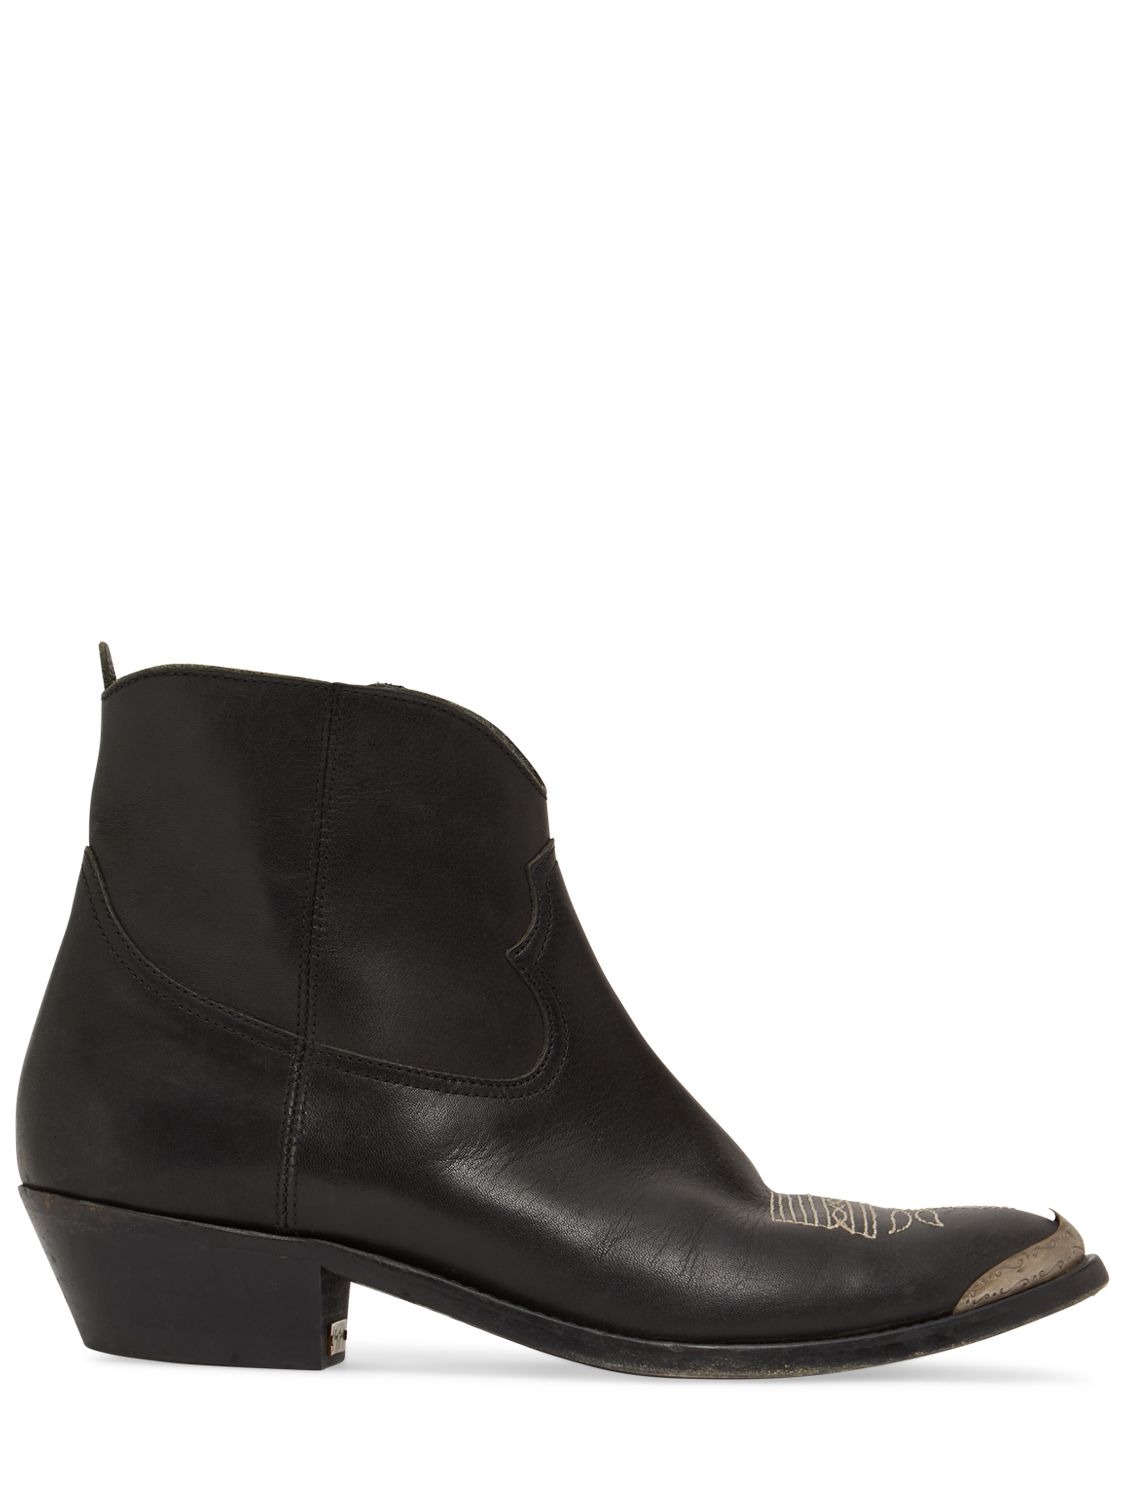 Mm Young Leather Ankle Boots - GOLDEN GOOSE - Modalova